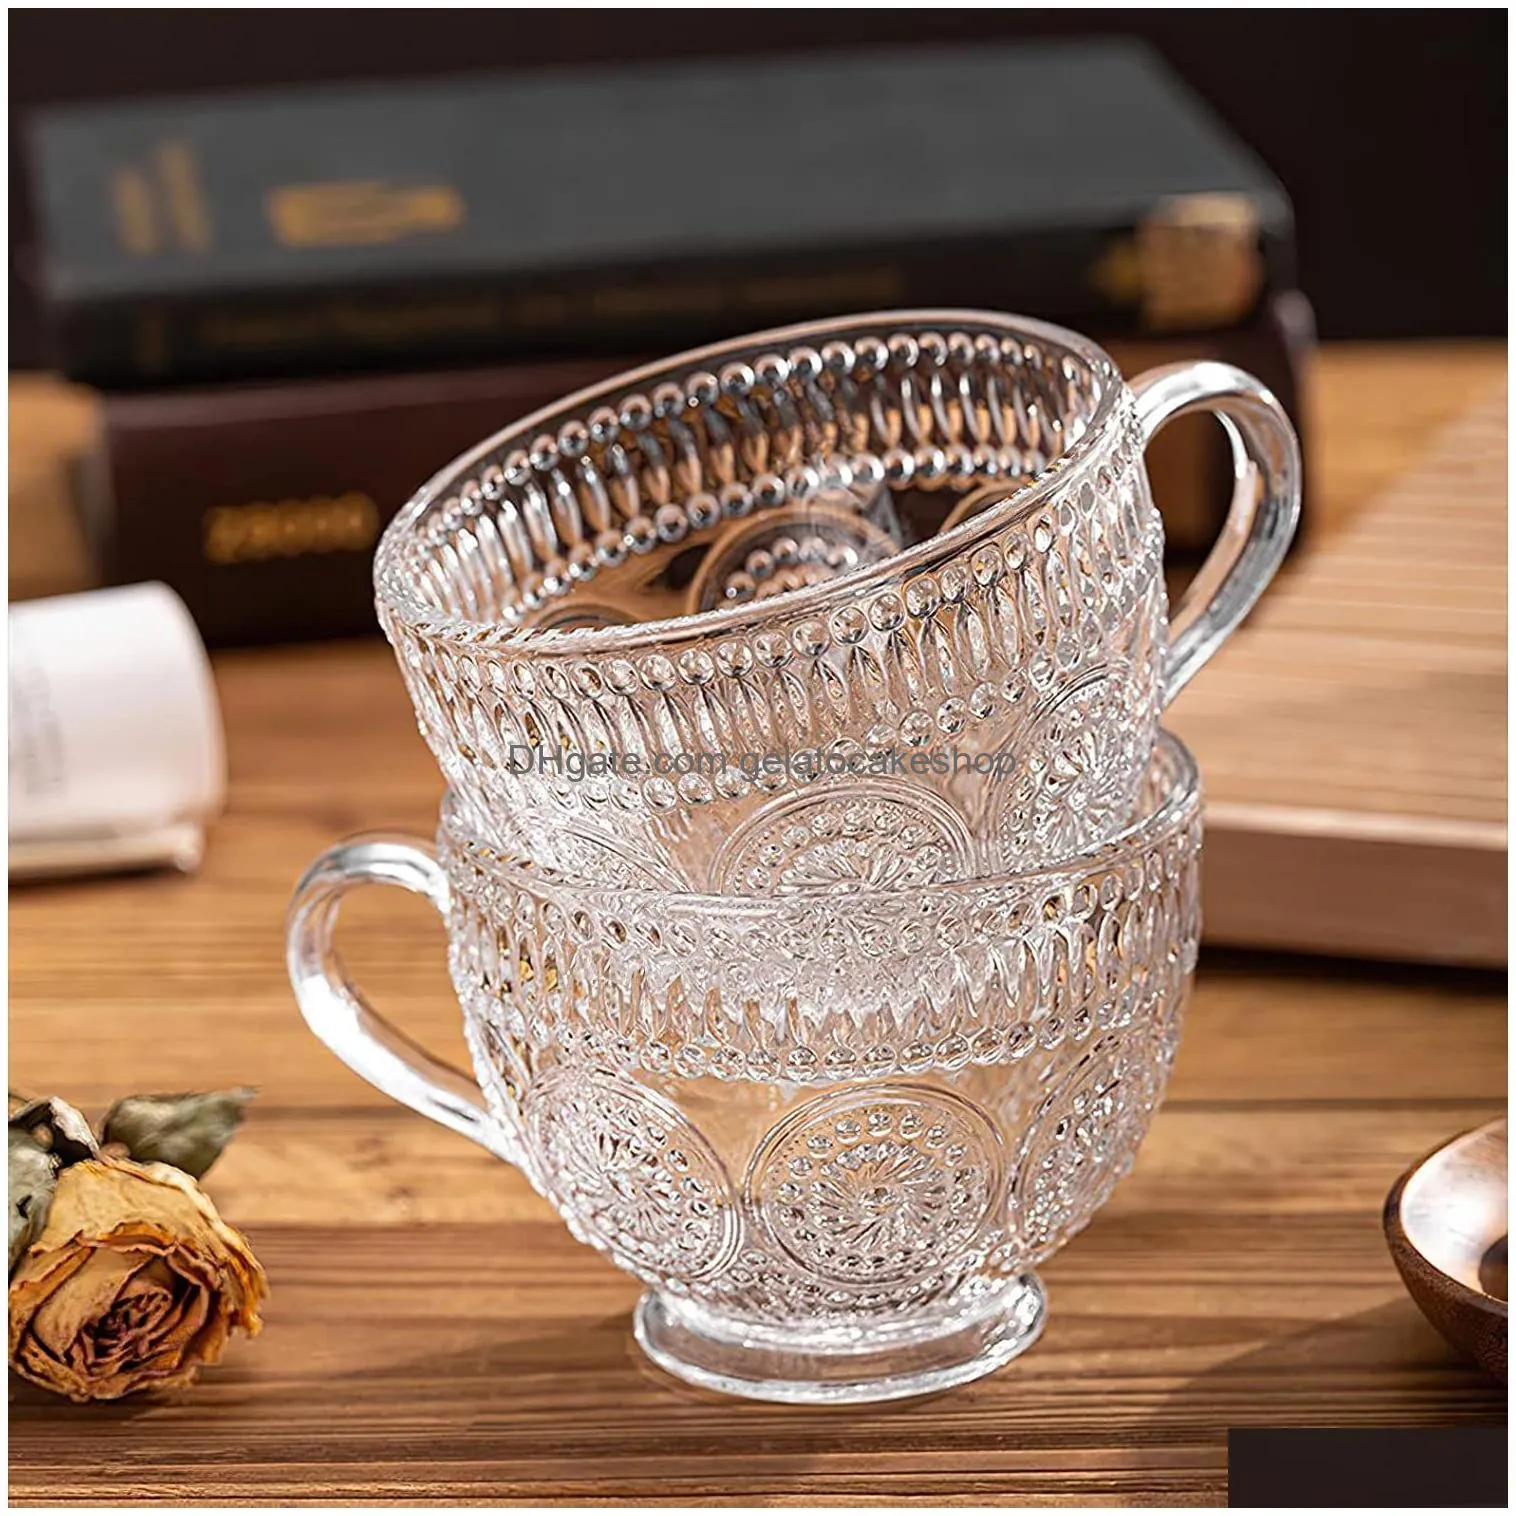 glass coffee mugs with handles embossed tea cups vintage drinking glasre for water milk latte cappuccino dessert beverage